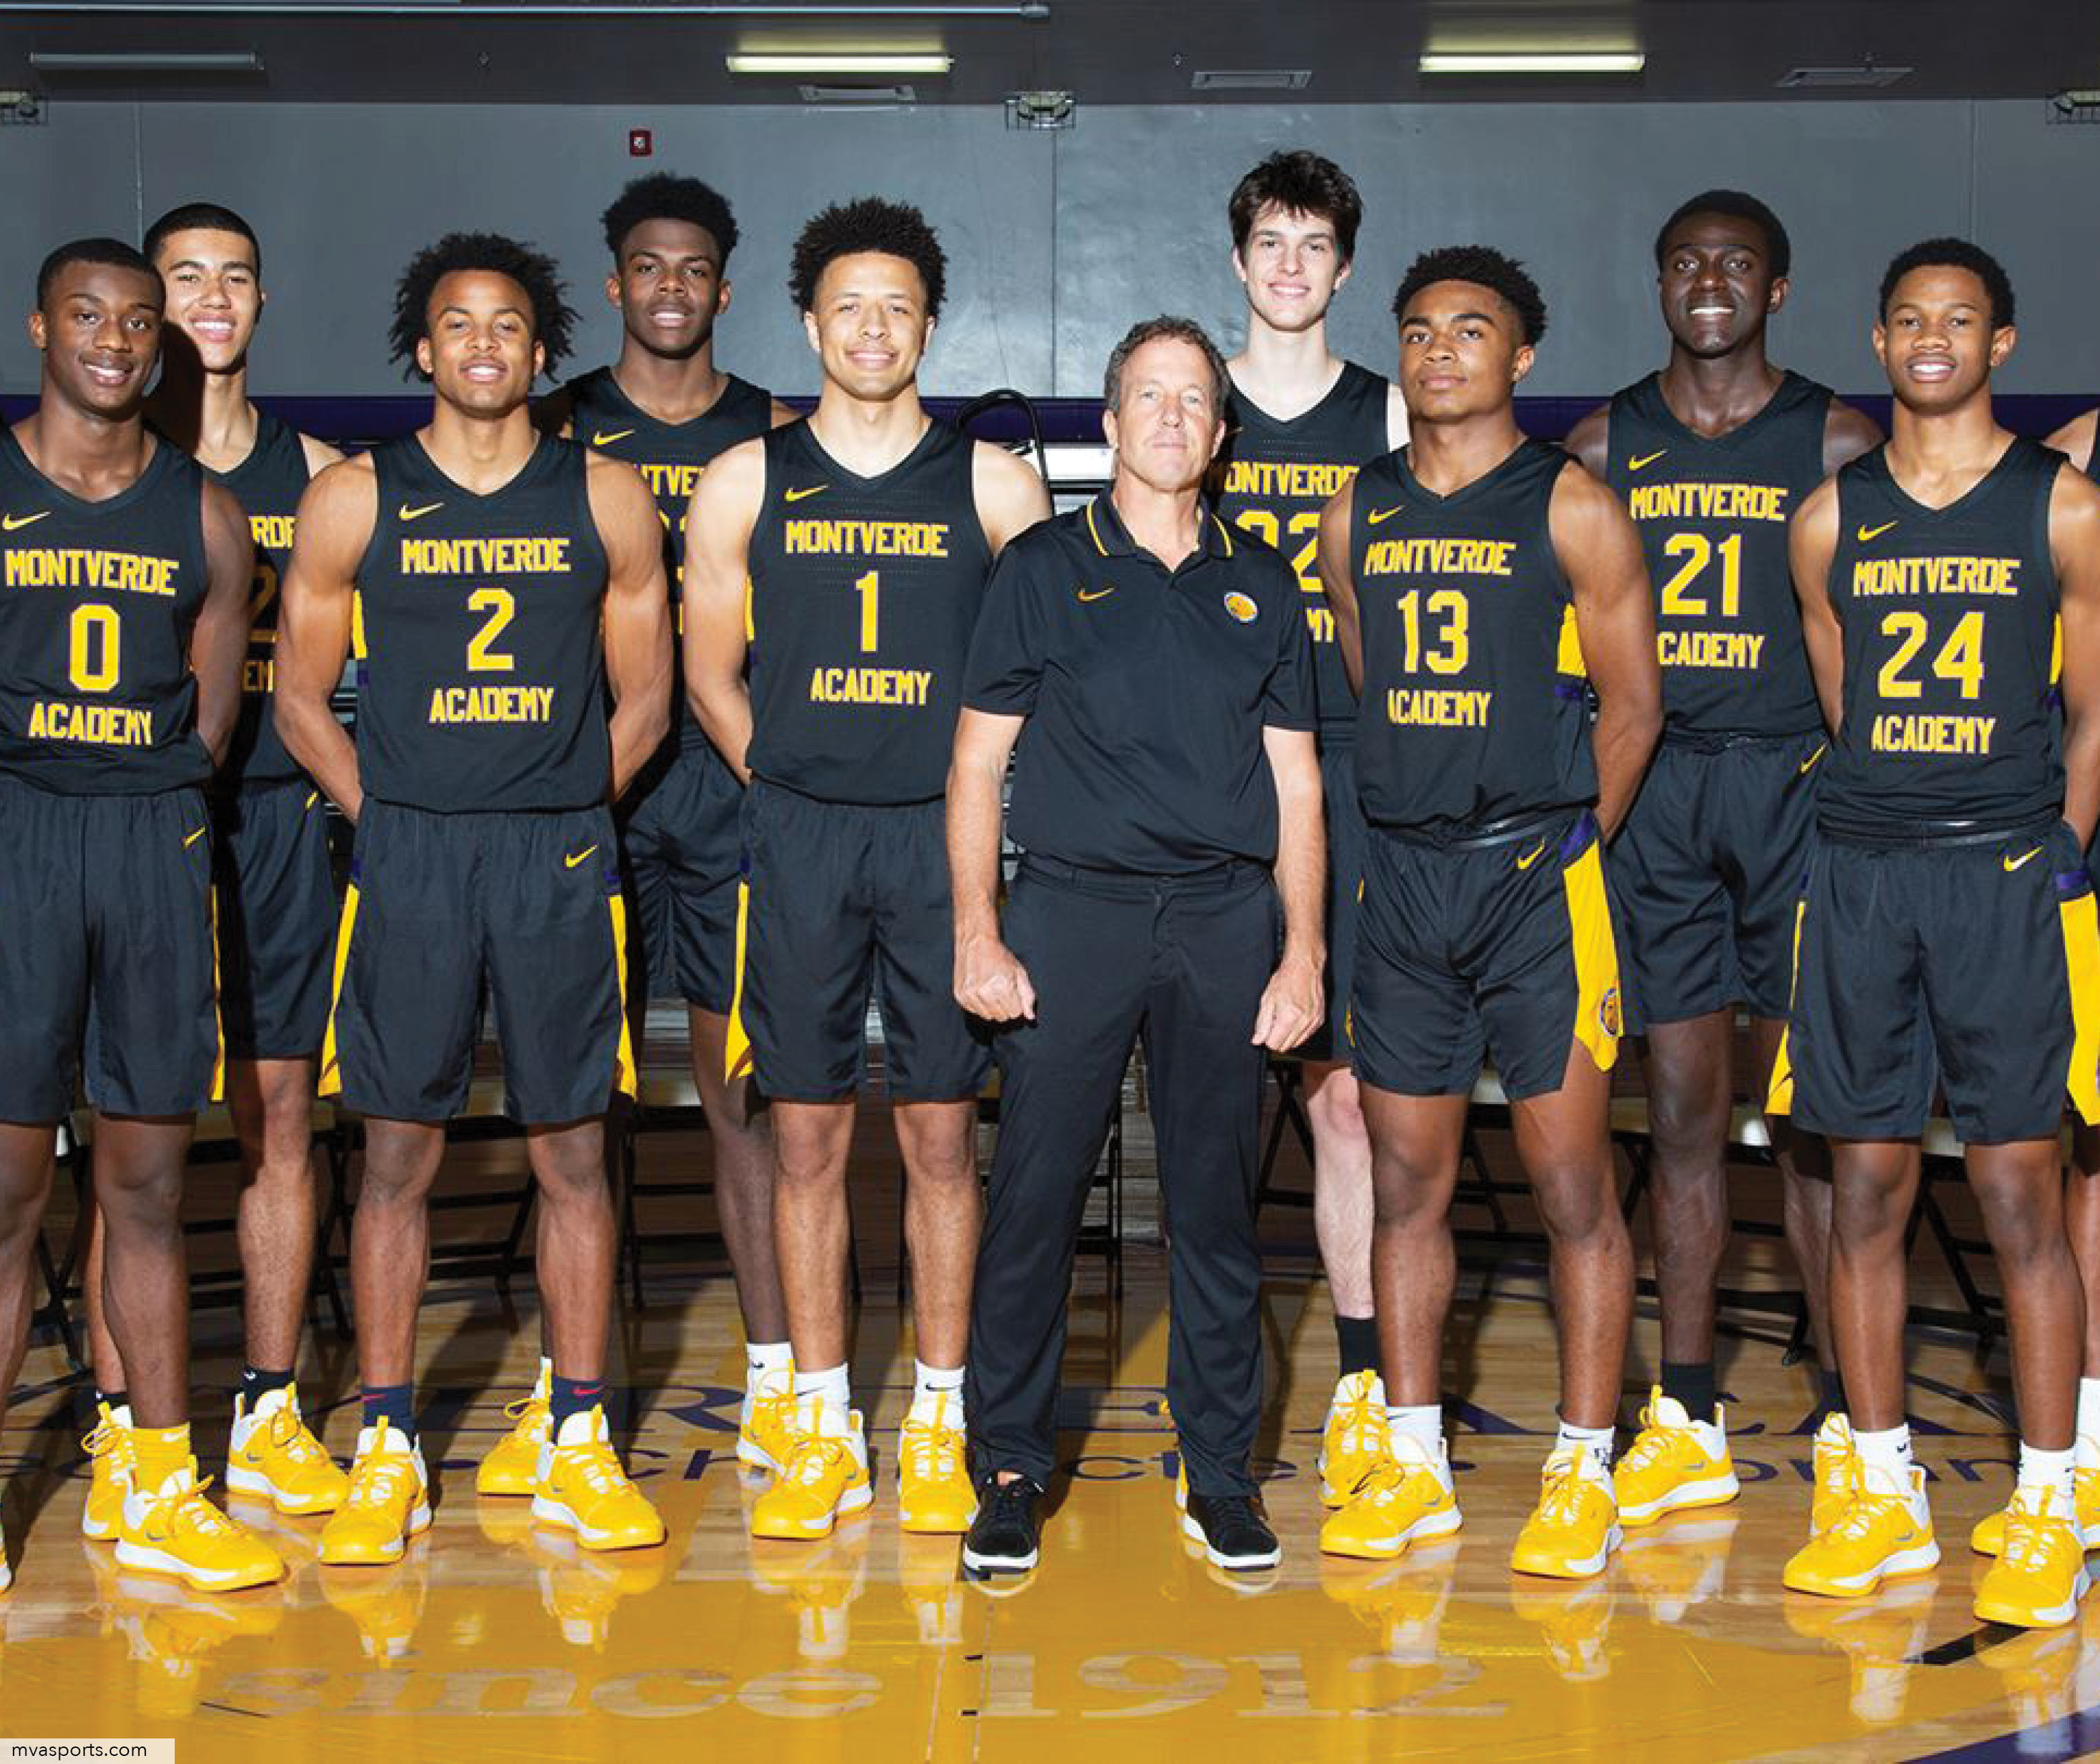 Can Anyone Beat No. 1 Montverde Academy? ITG Next